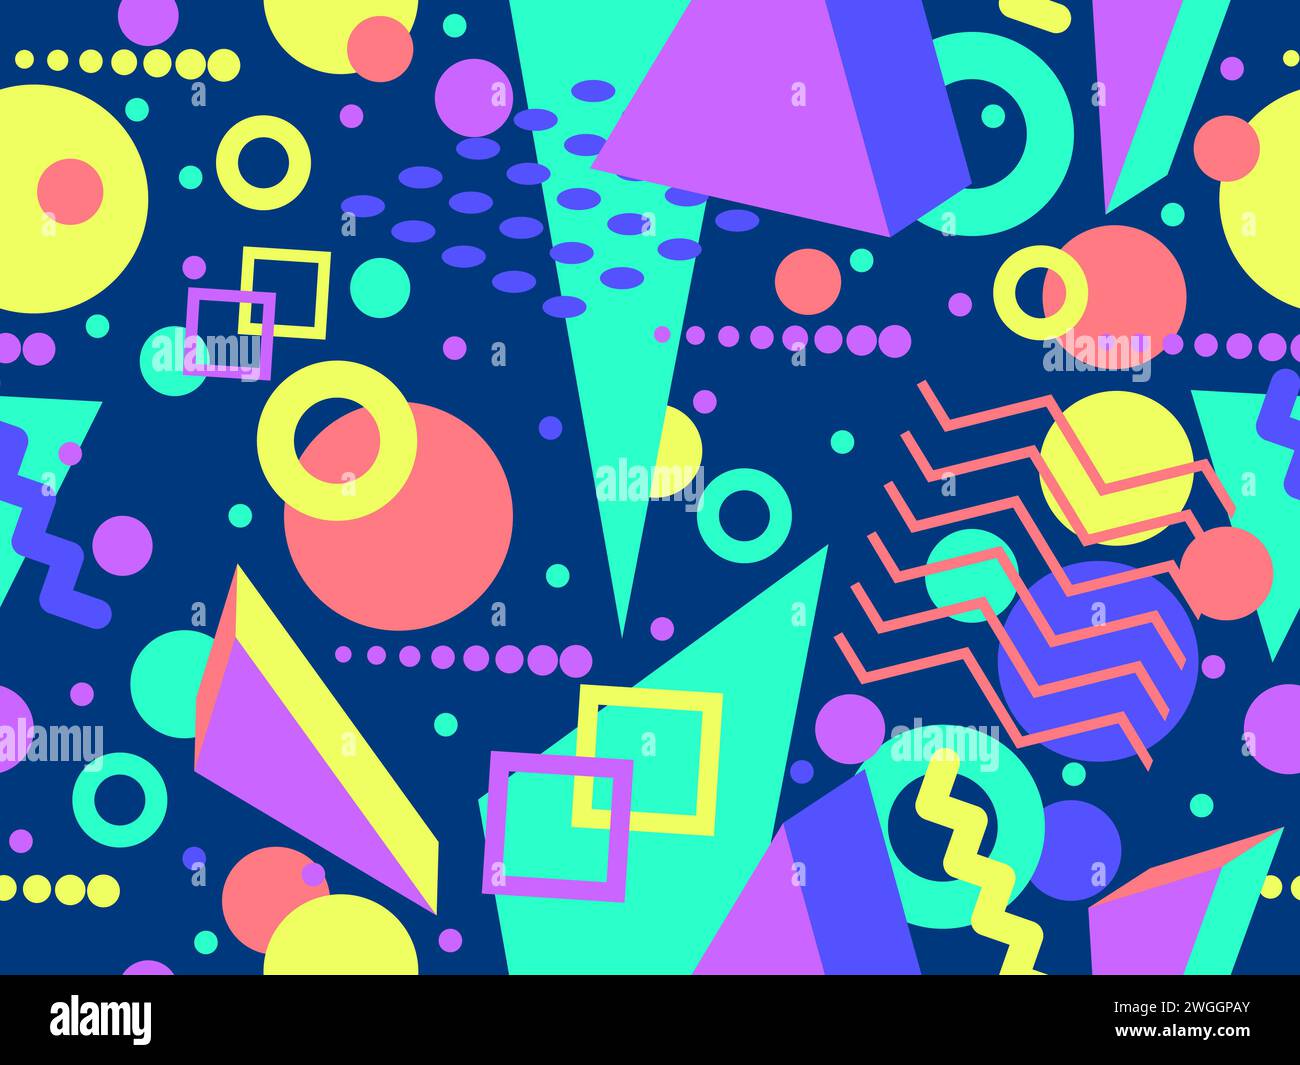 Memphis seamless pattern with geometric shapes in 80s and 90s style. Geometric shapes of different shapes and colors. Design of promotional products, Stock Vector